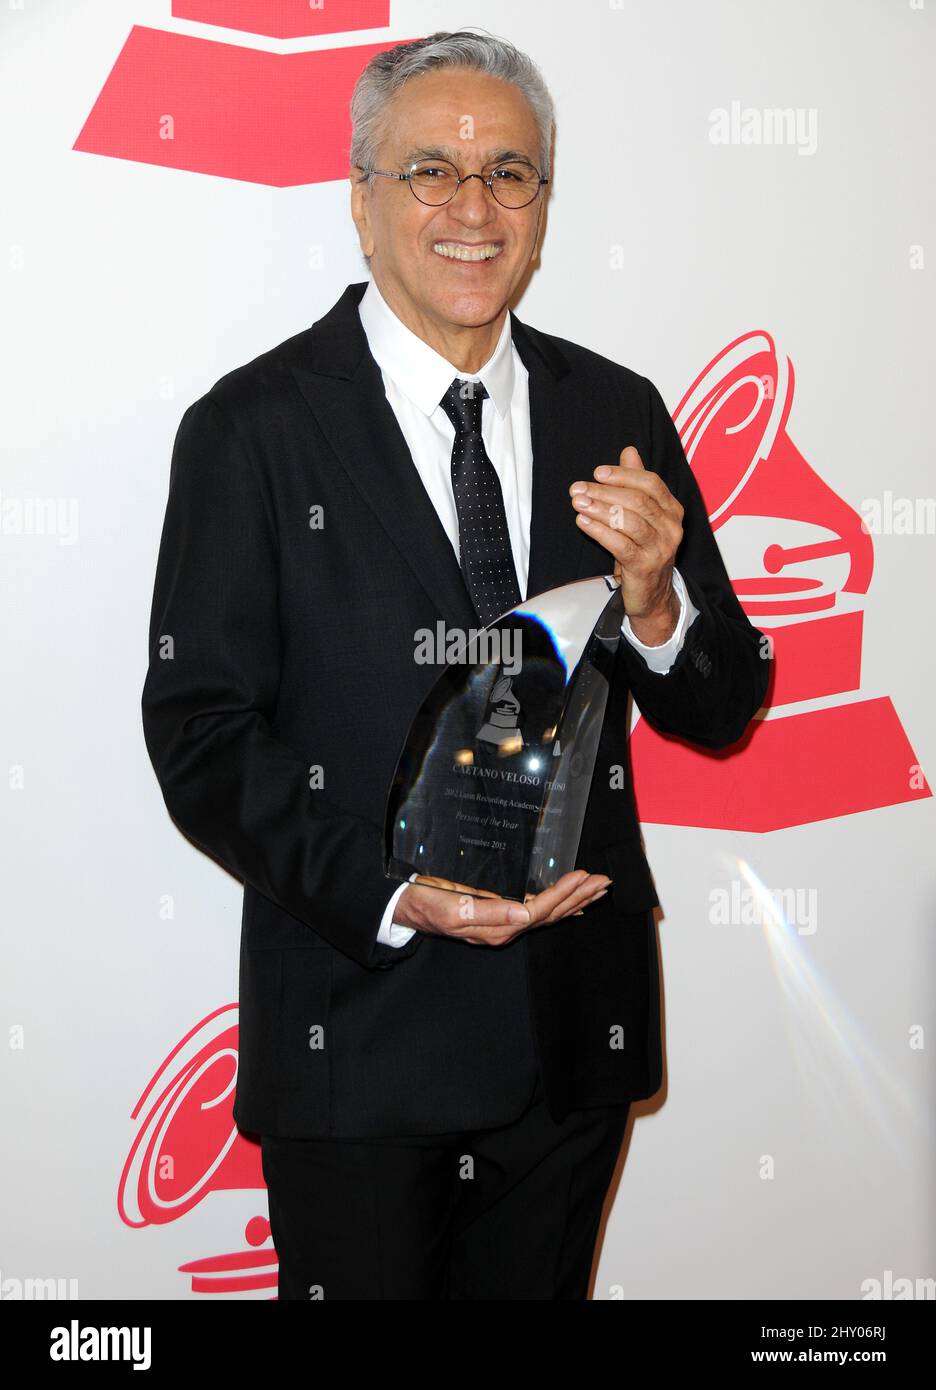 Caetano Veloso nimmt an der Latin Recording Academy Person of the Year Tribute to Caetano Veloso 2012 in der MGM Grand Garden Arena in Las Vegas, USA, Teil. Stockfoto